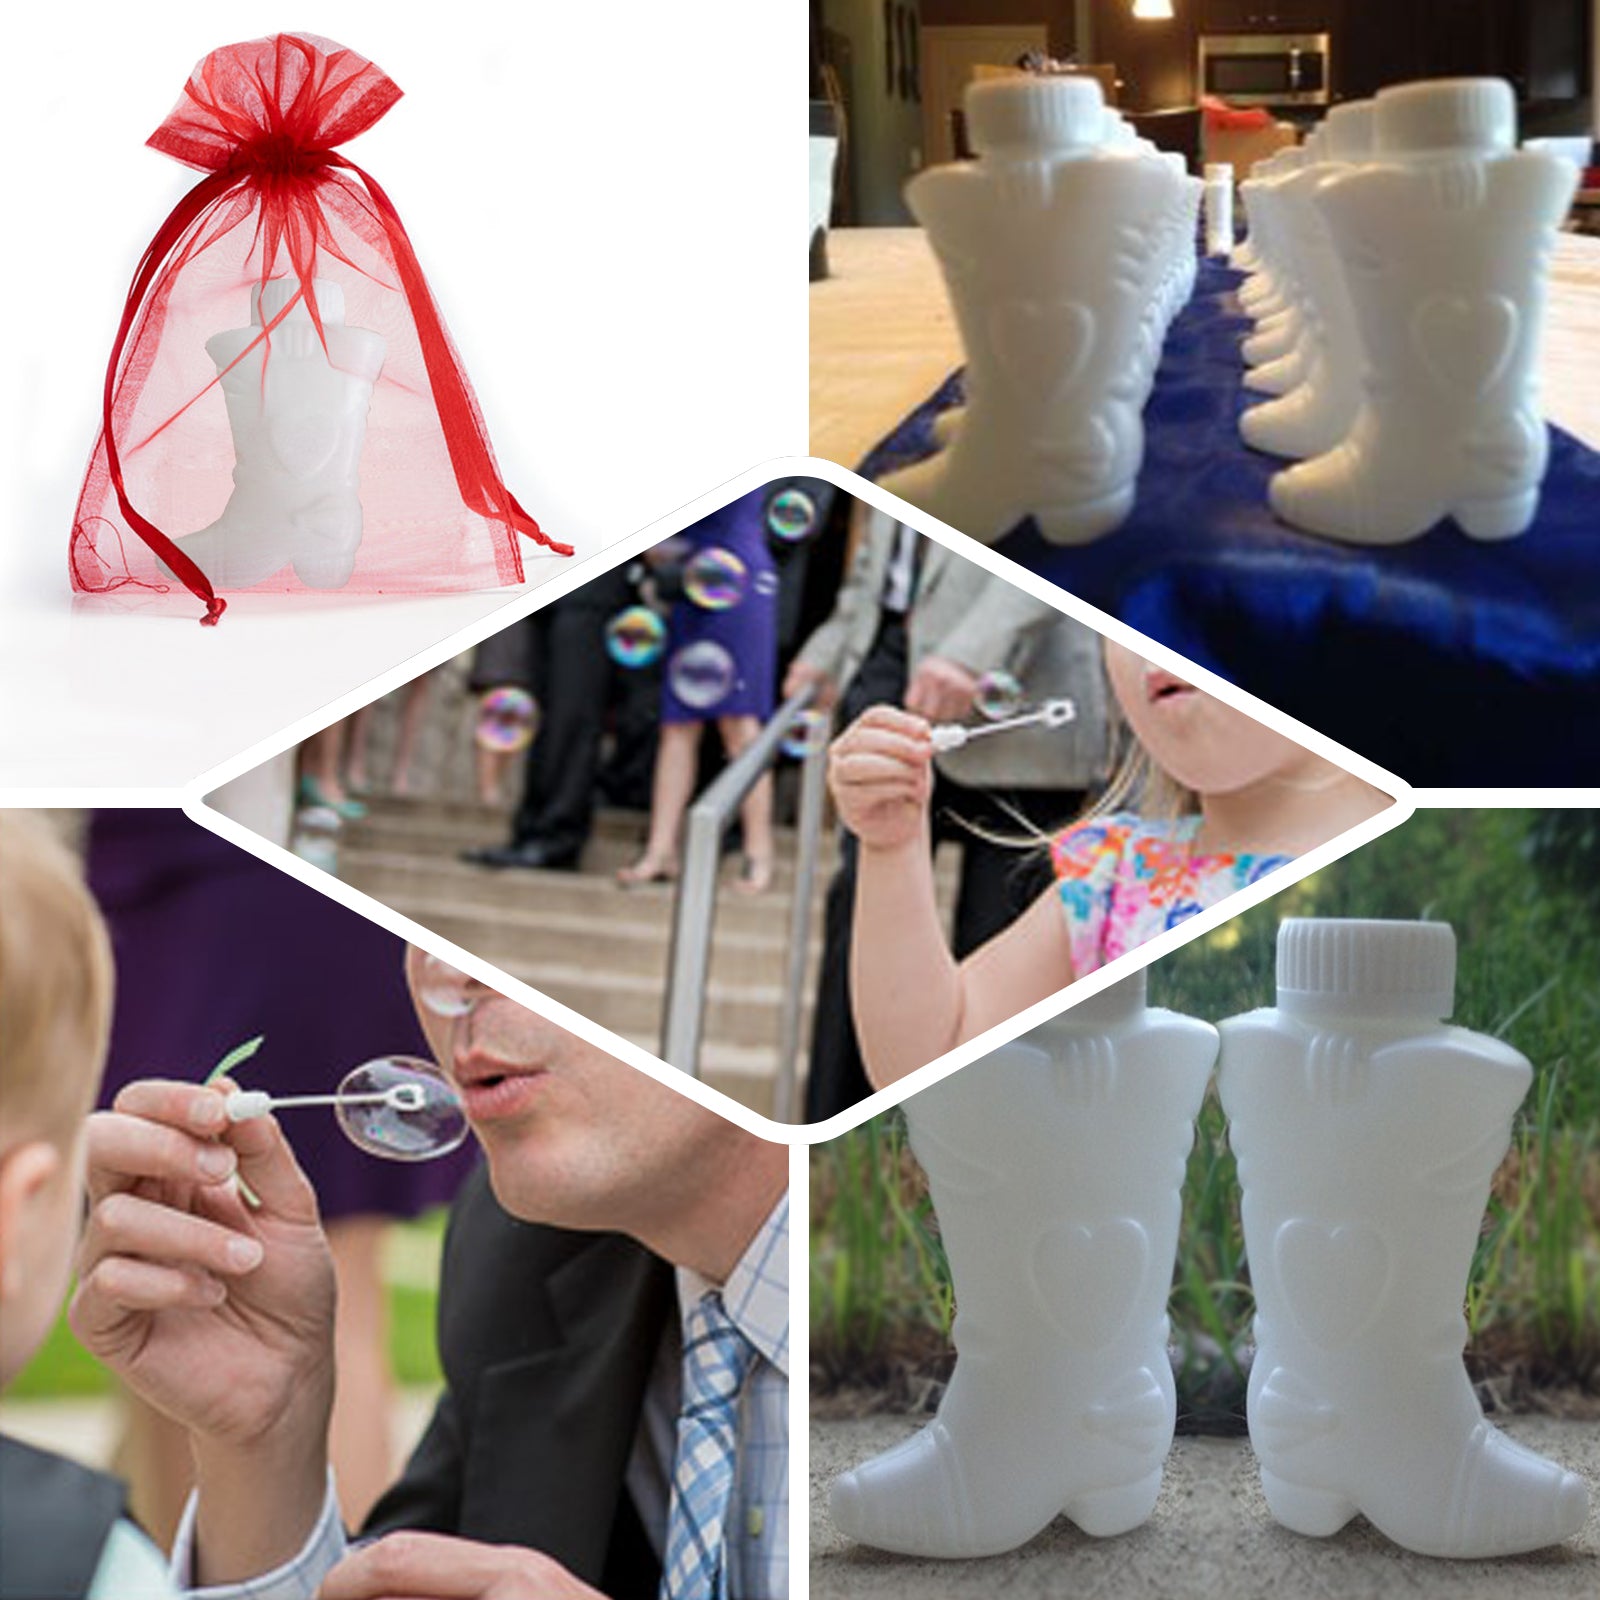 Efavormart Wholesale 24 pack White Cowboy Boot Bubbles Wedding Bridal Favor  for Wedding, Anniversary, Engagement, Bridal, Celebration, Valentine’s Day, Family Reunion, and Gift for Couple Boy Girl - image 4 of 11